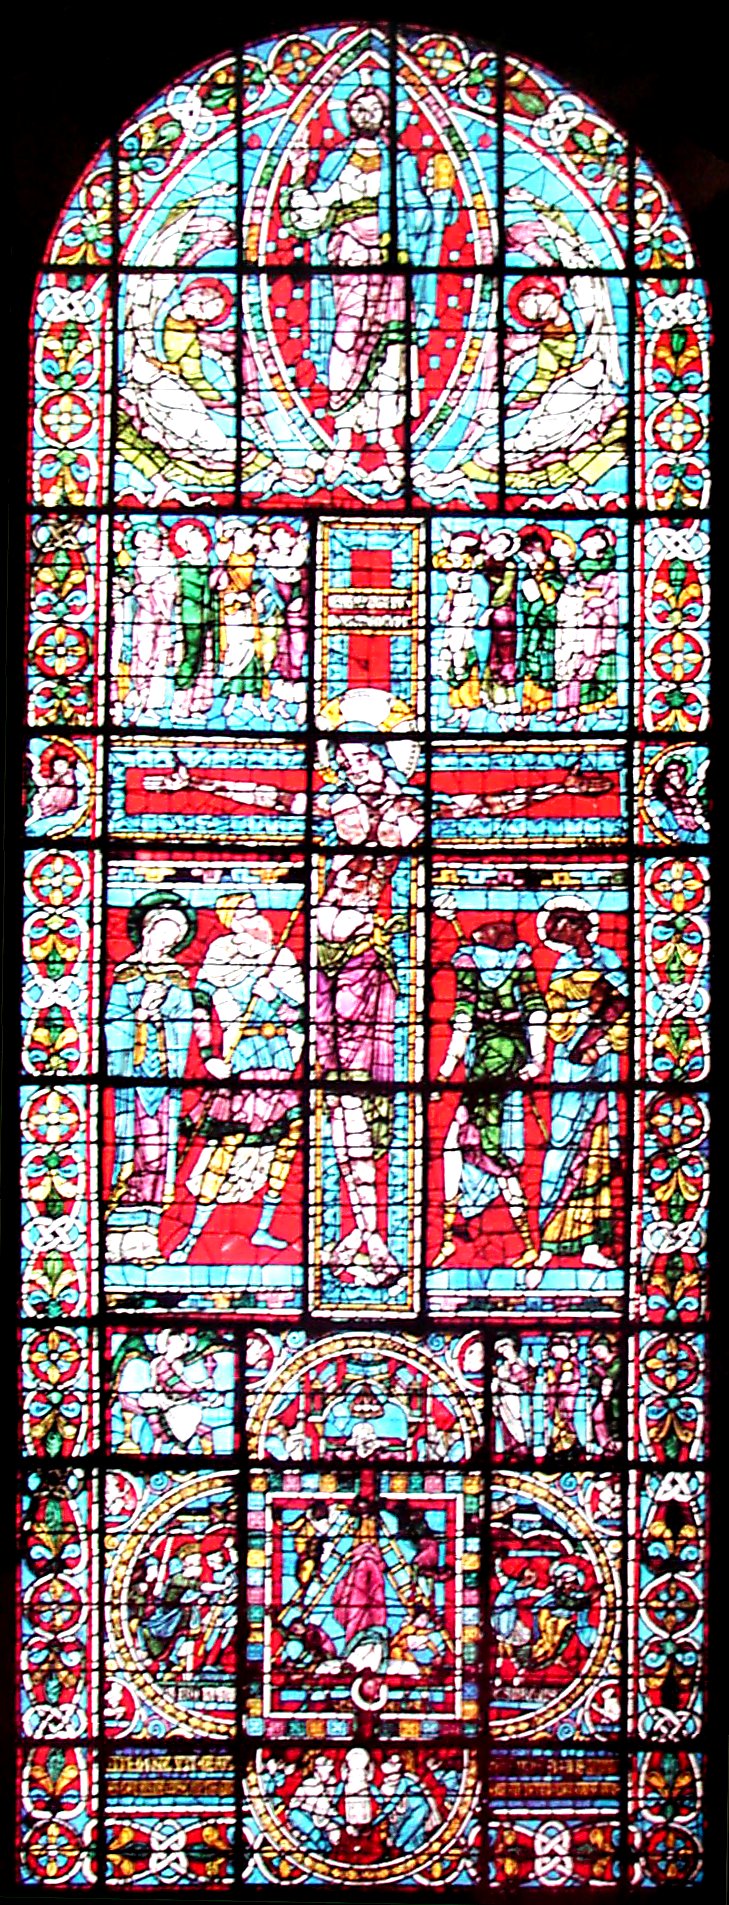 Window of the crucifixion in St Peter's Cathedral, Poitiers. image � abelard.org, 2004